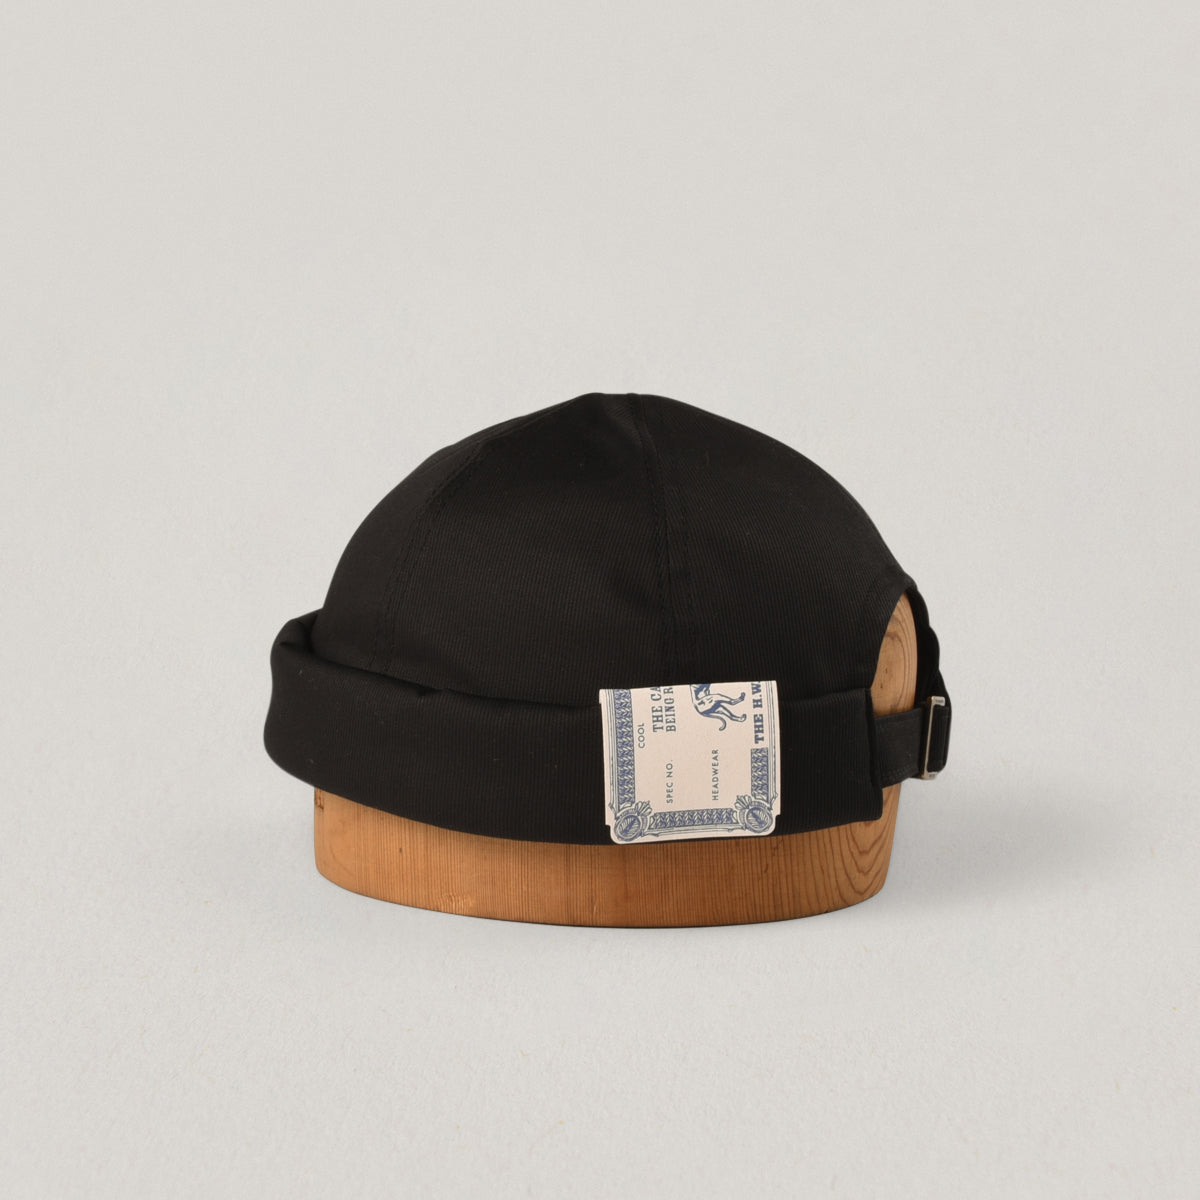 H.W. DOG & CO. PIQUE ROLL CAP - BLACK – Pickings and Parry